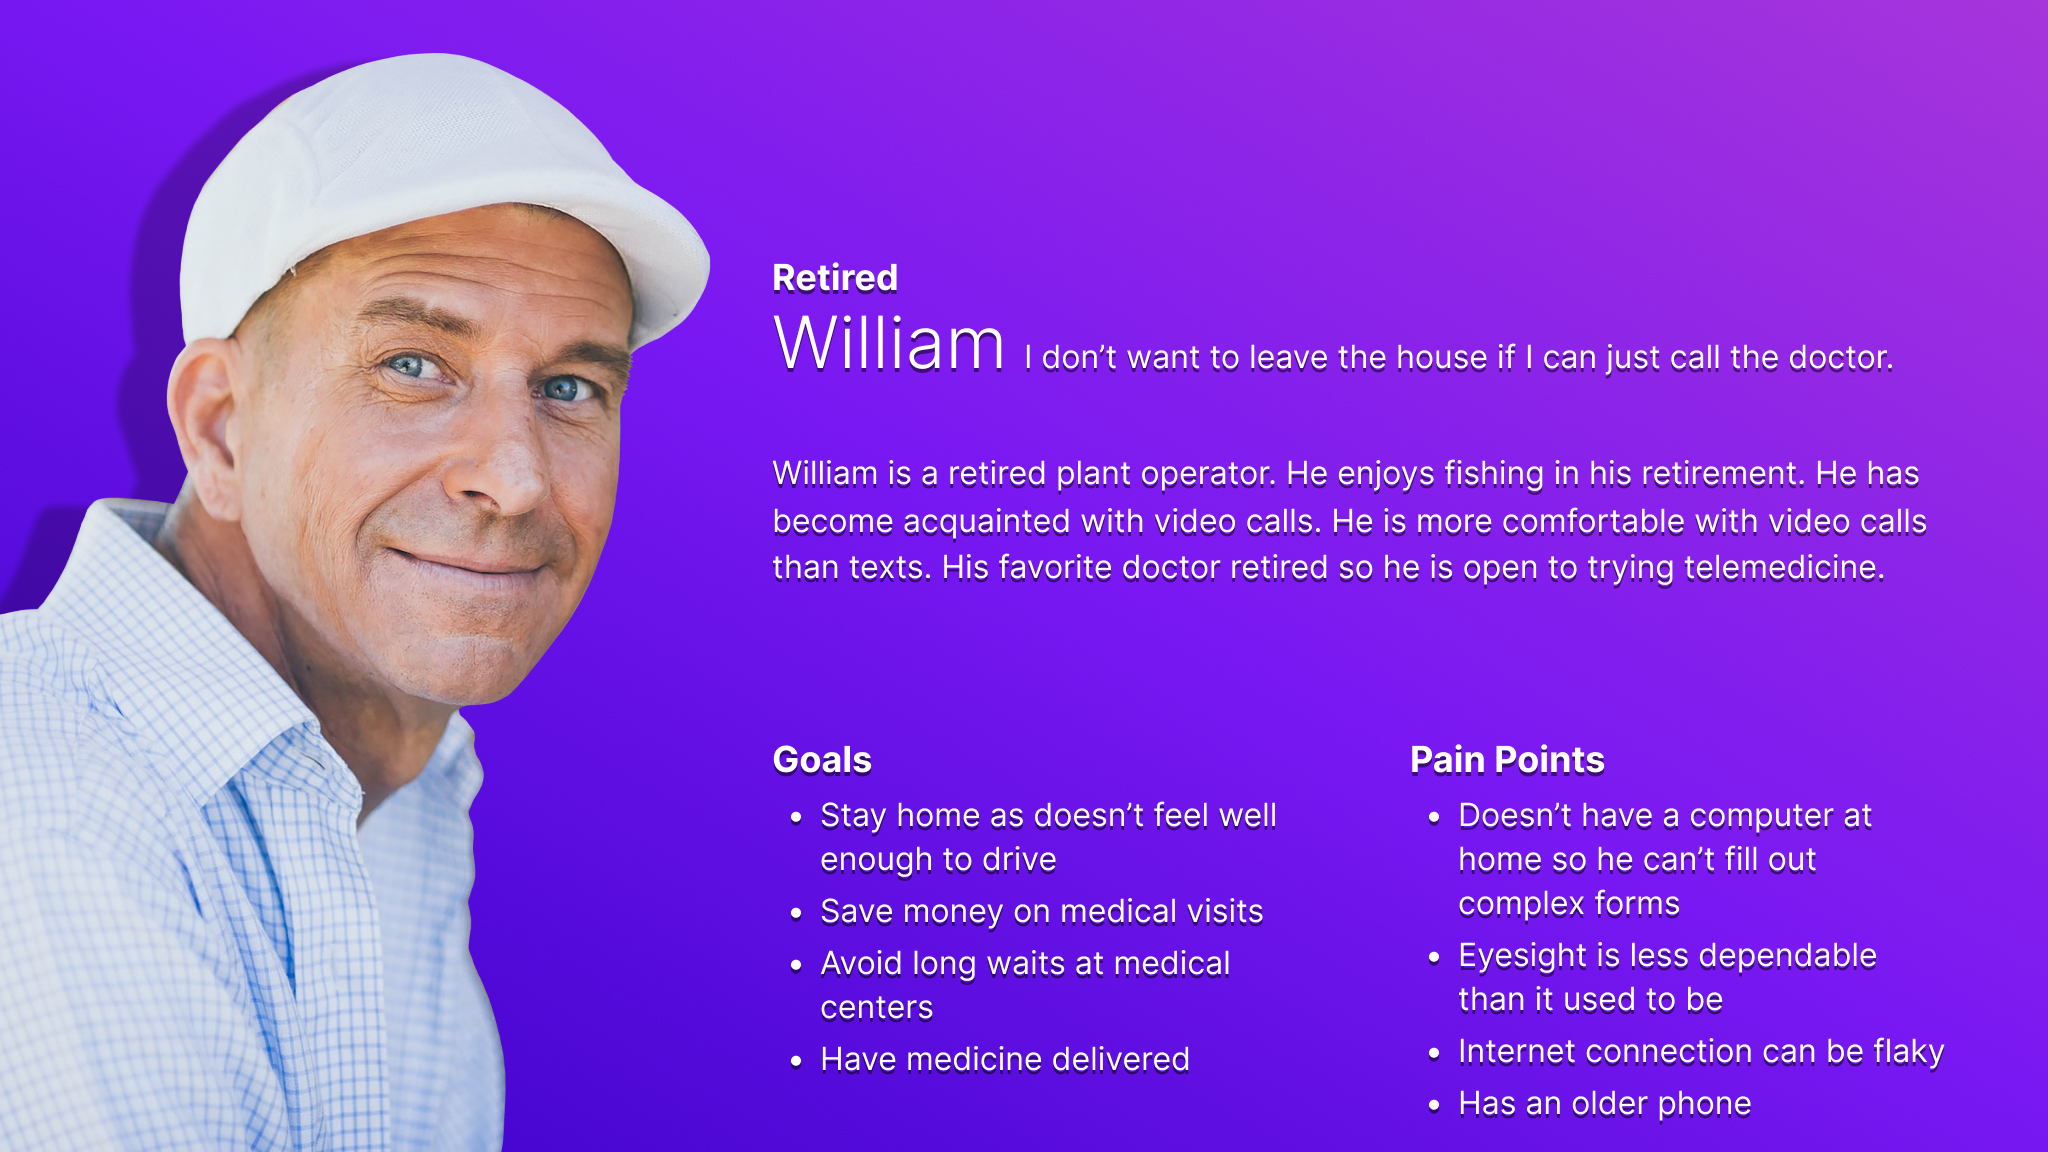 Persona card for William who represents users of the mobile app to be treated and older users.